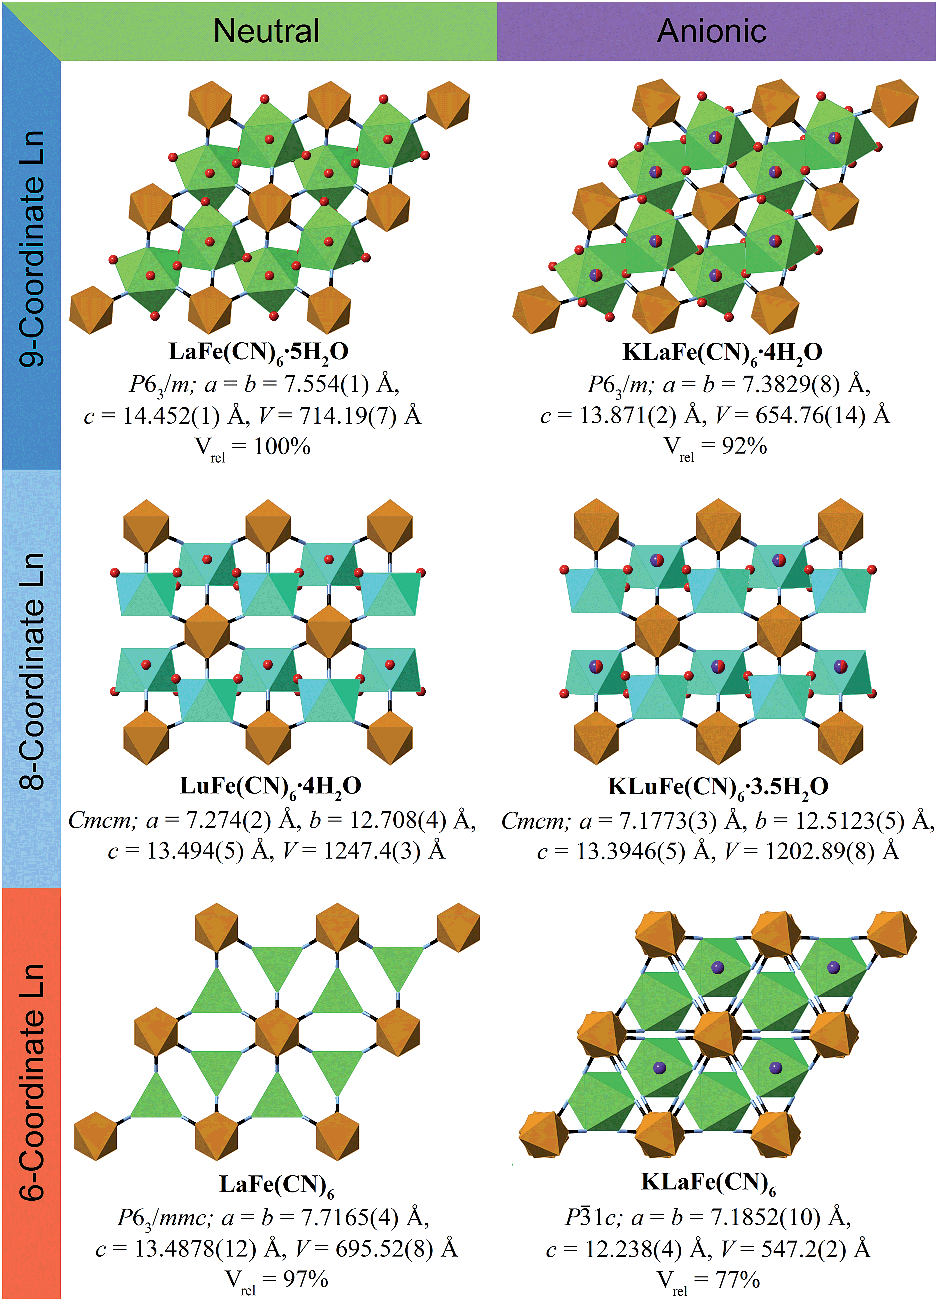 Topotactic Structural Conversion And Hydration Dependent Thermal Expansion In Robust Lnm Iii Cn 6 N H 2 O And Flexible Alnfe Ii Cn 6 N H 2 O F Chemical Science Rsc Publishing Doi 10 1039 C4scj